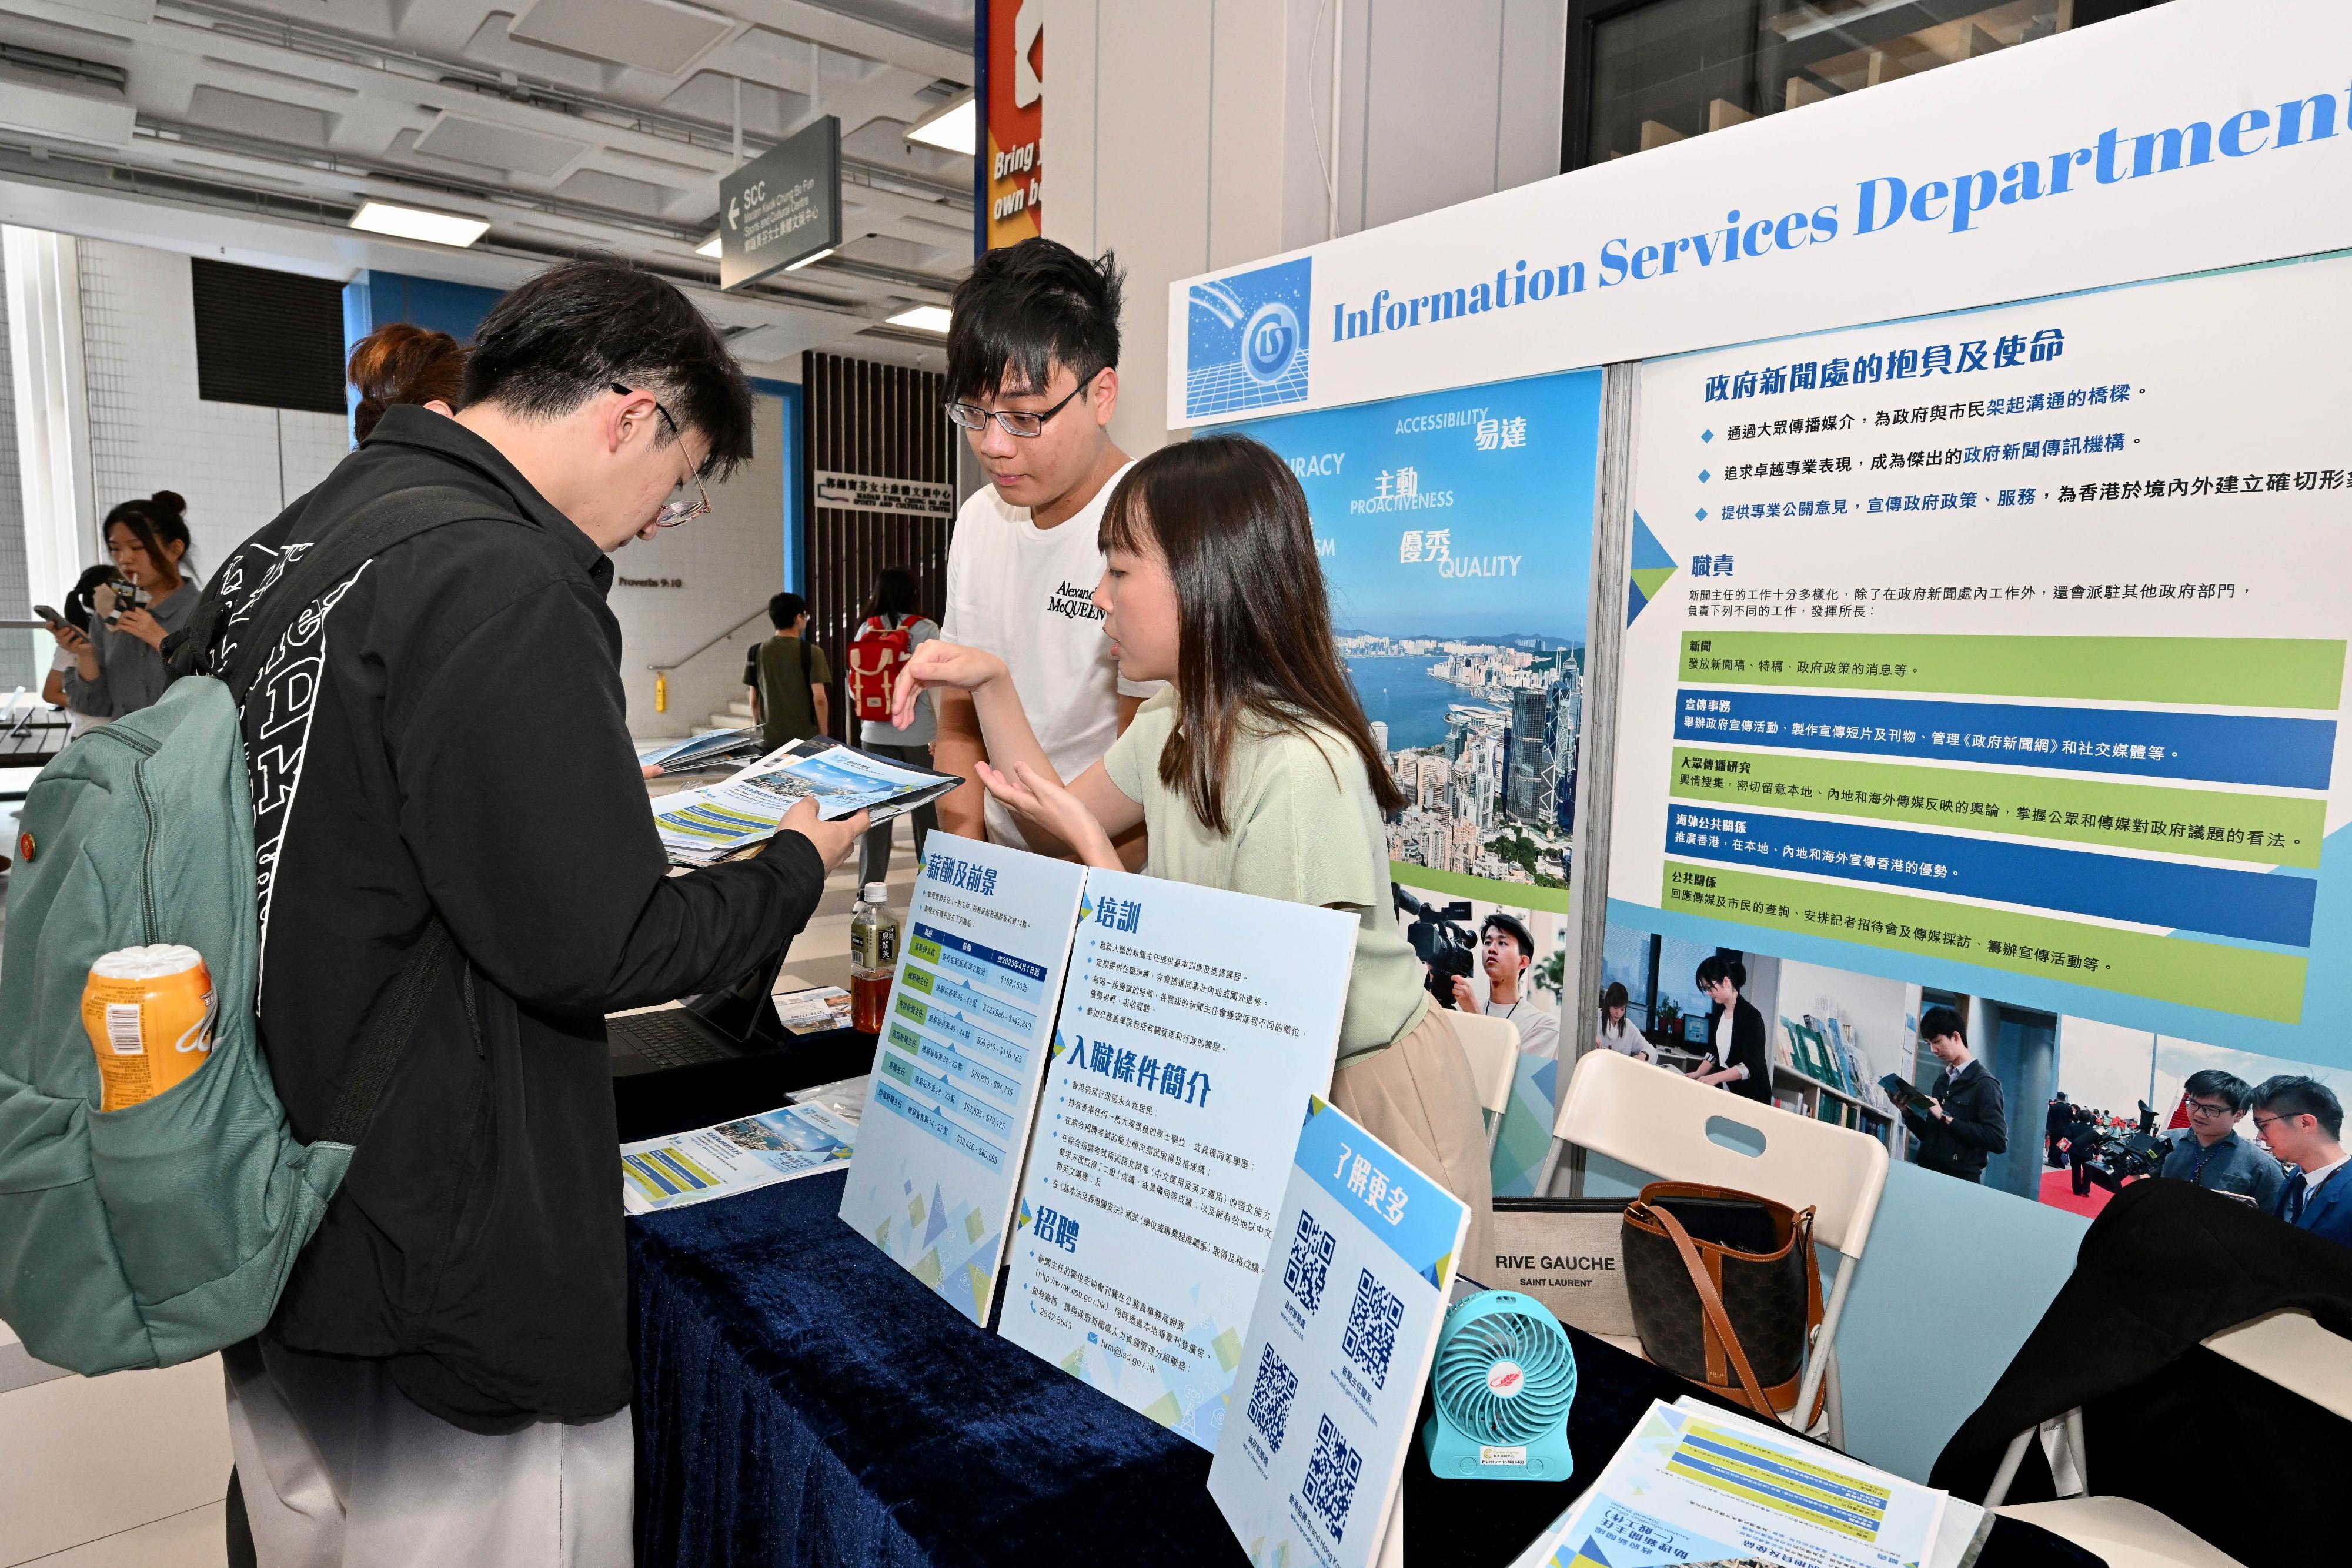 Hong Kong Baptist University (HKBU) held a Government Career Fair at its campus today (September 20) to introduce to students the work and recruitment arrangements of 47 grades to let them learn more about the employment opportunities offered by different grades to young people. Photo shows staff from the Information Officer grade who are graduates of HKBU introducing information about the grade to a visiting student at the Information Services Department's booth.